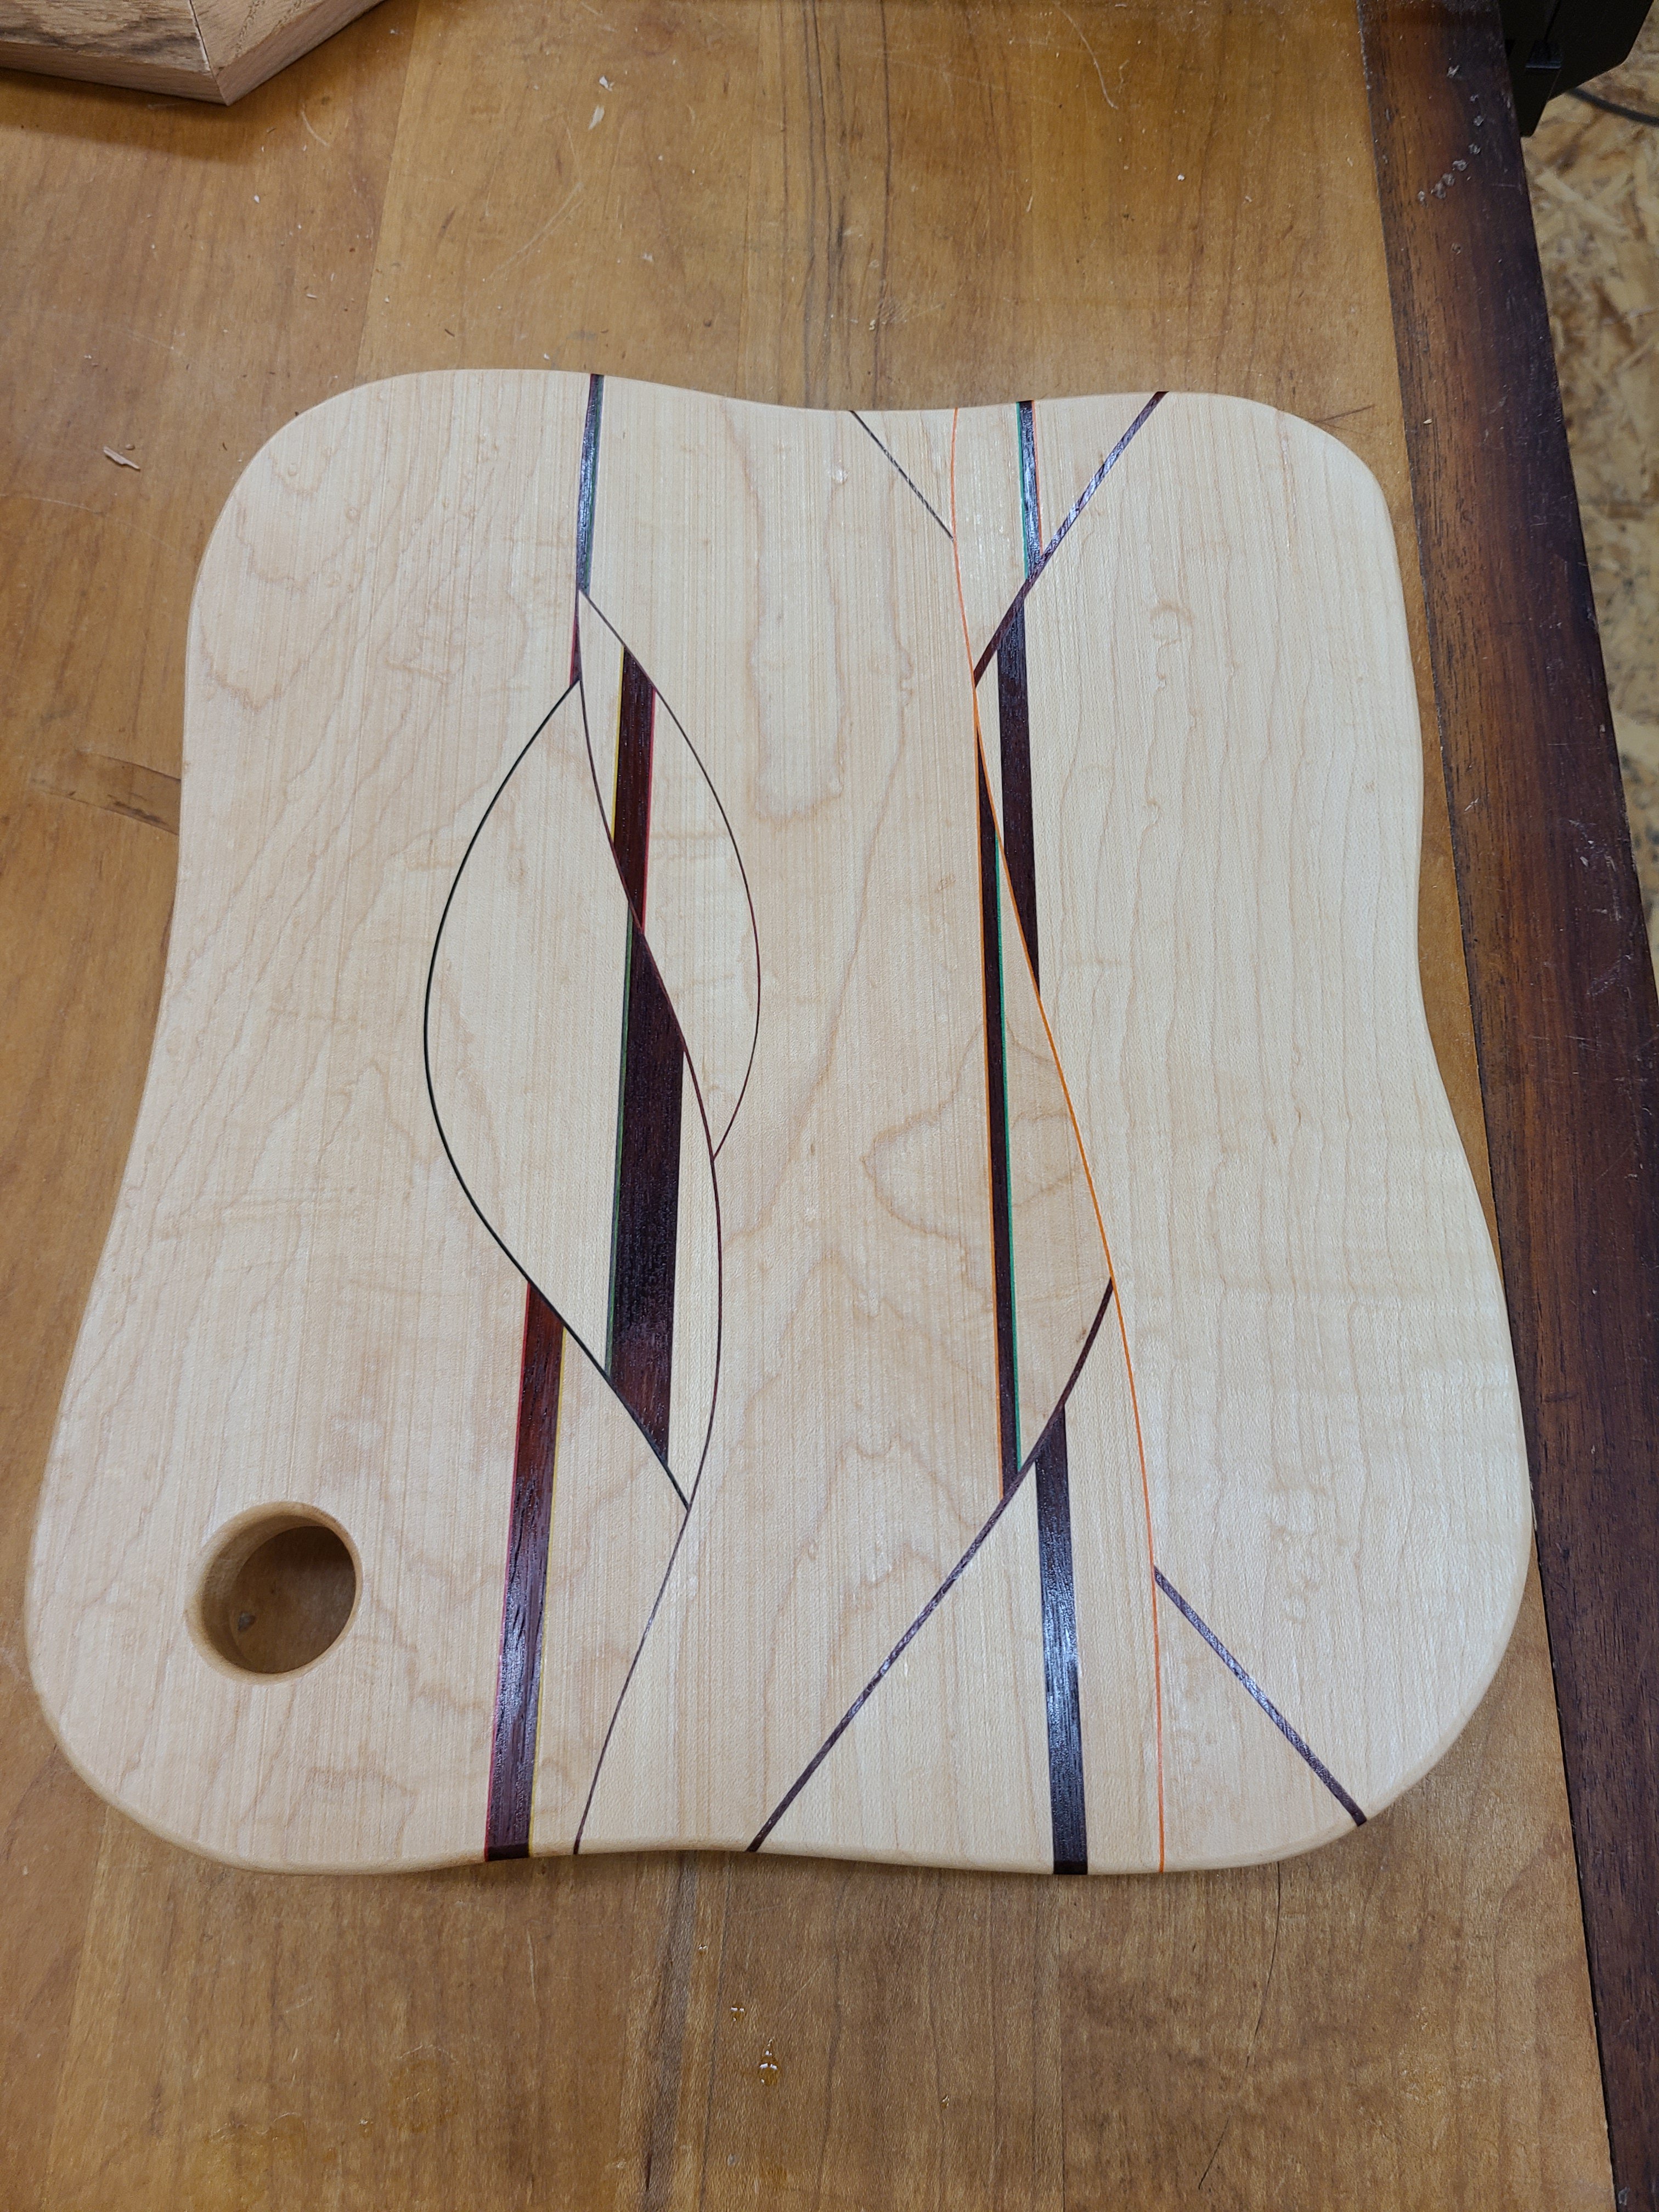 Quilted Cutting Board #1